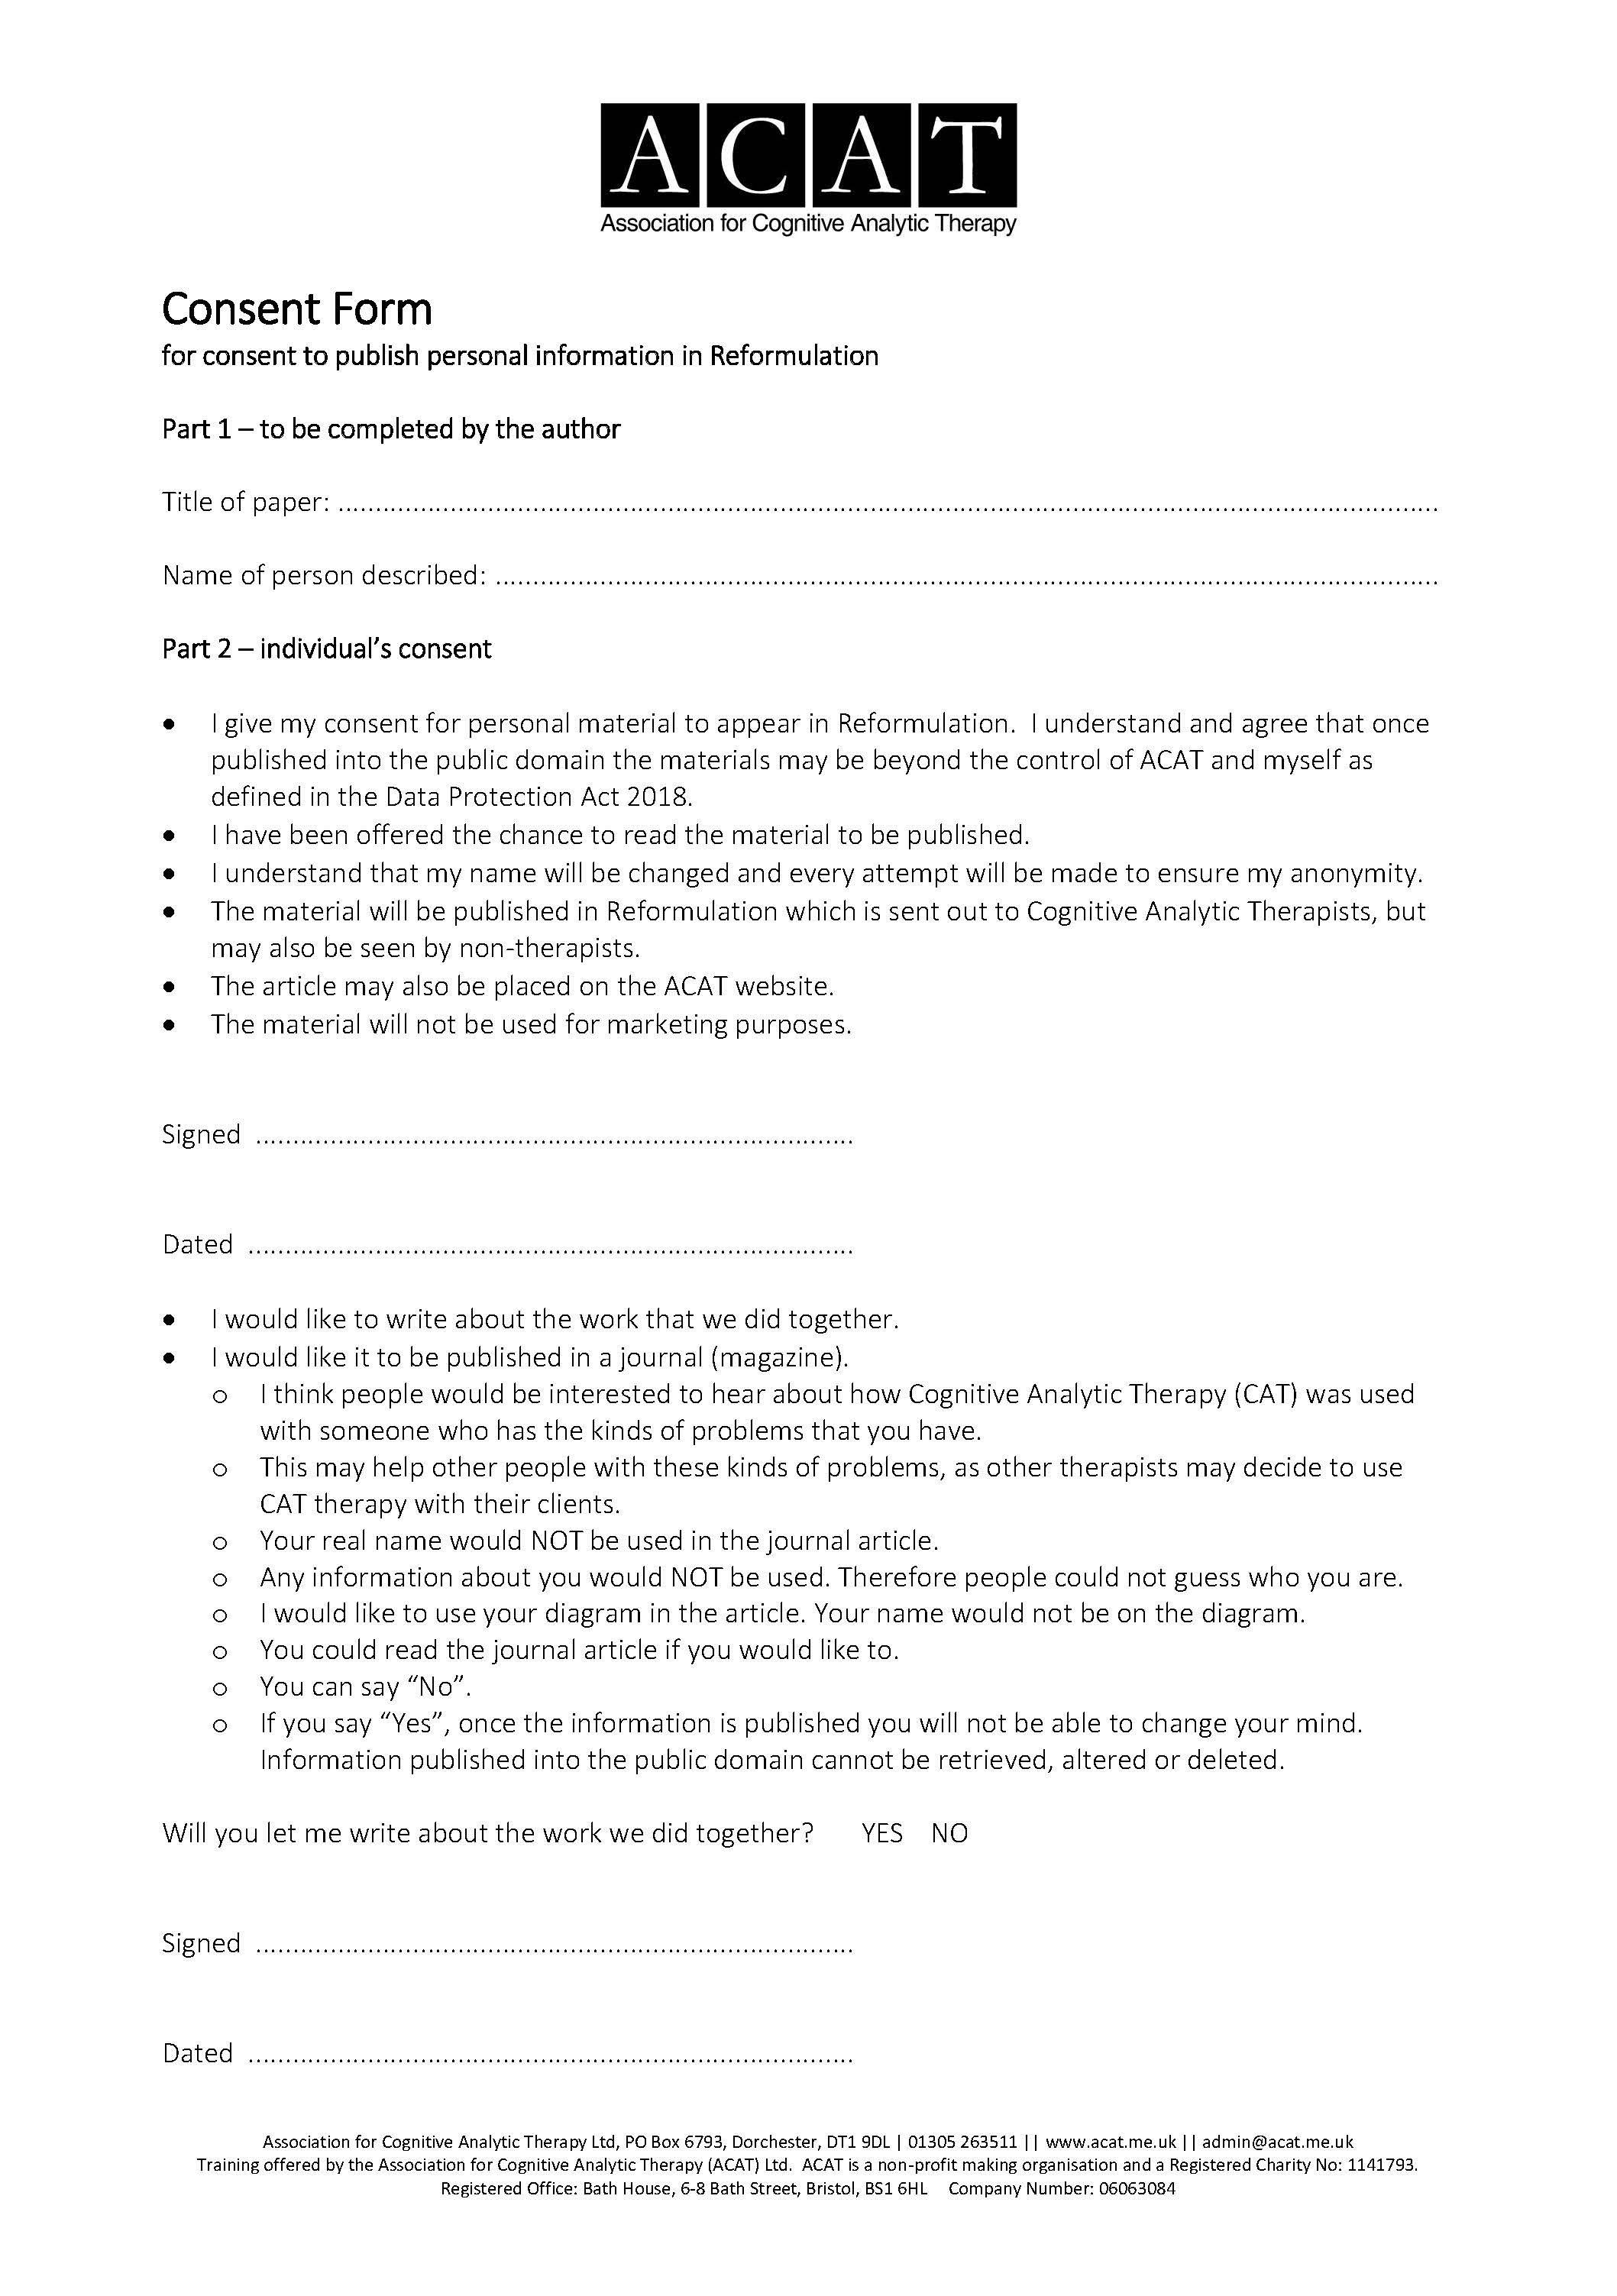 Consent to publish form